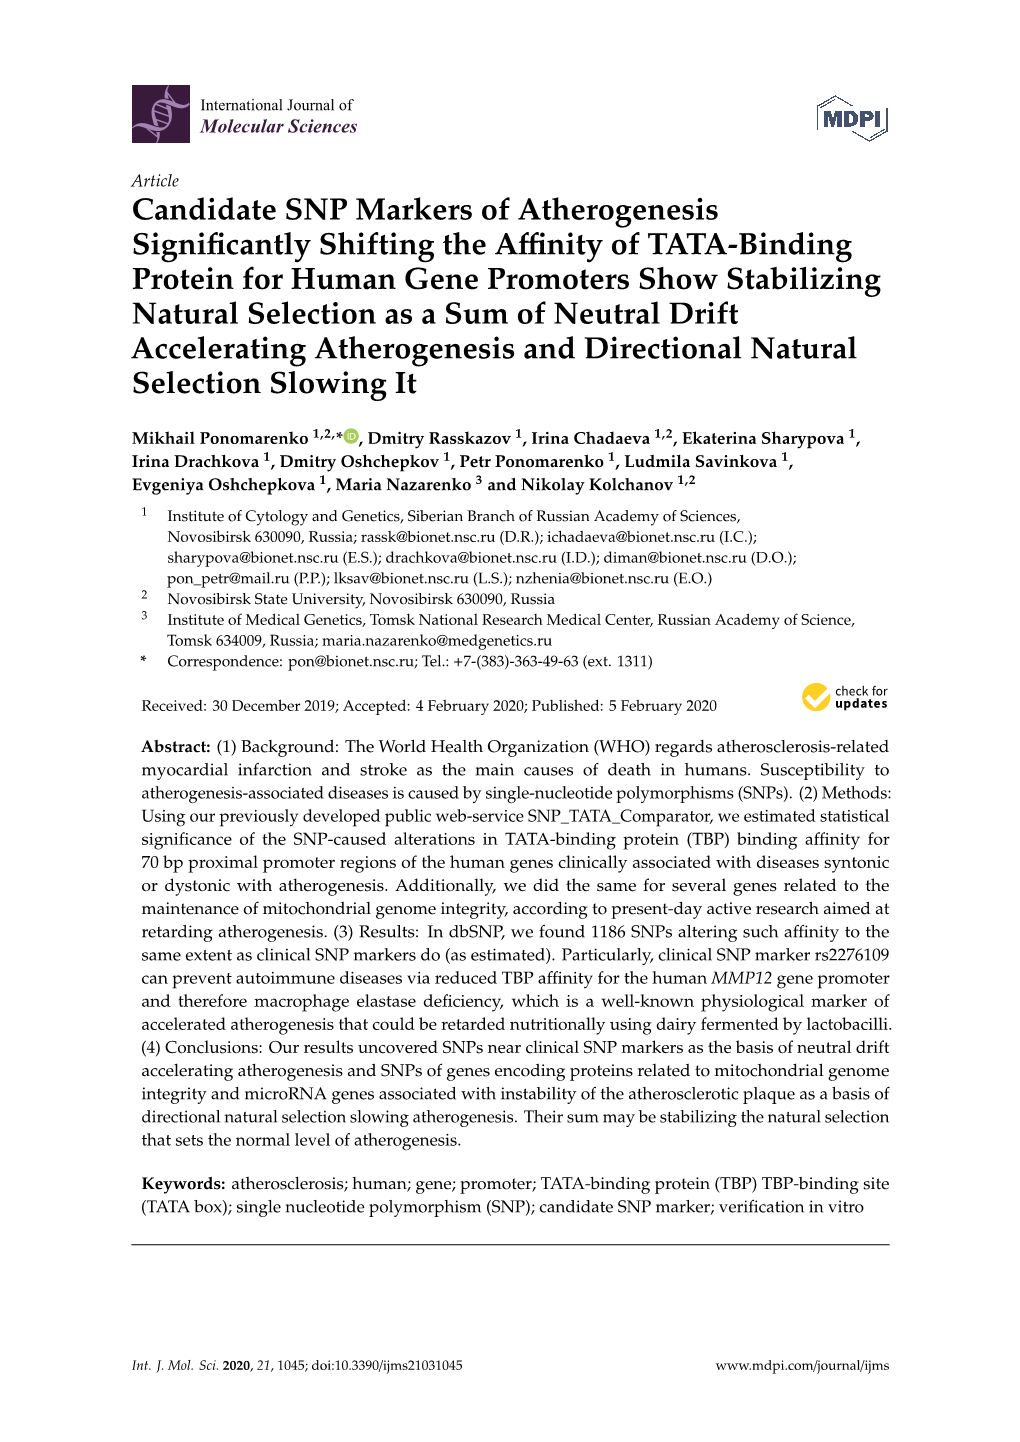 Candidate SNP Markers of Atherogenesis Significantly Shifting the Affinity of TATA-Binding Protein for Human Gene Promoters Show